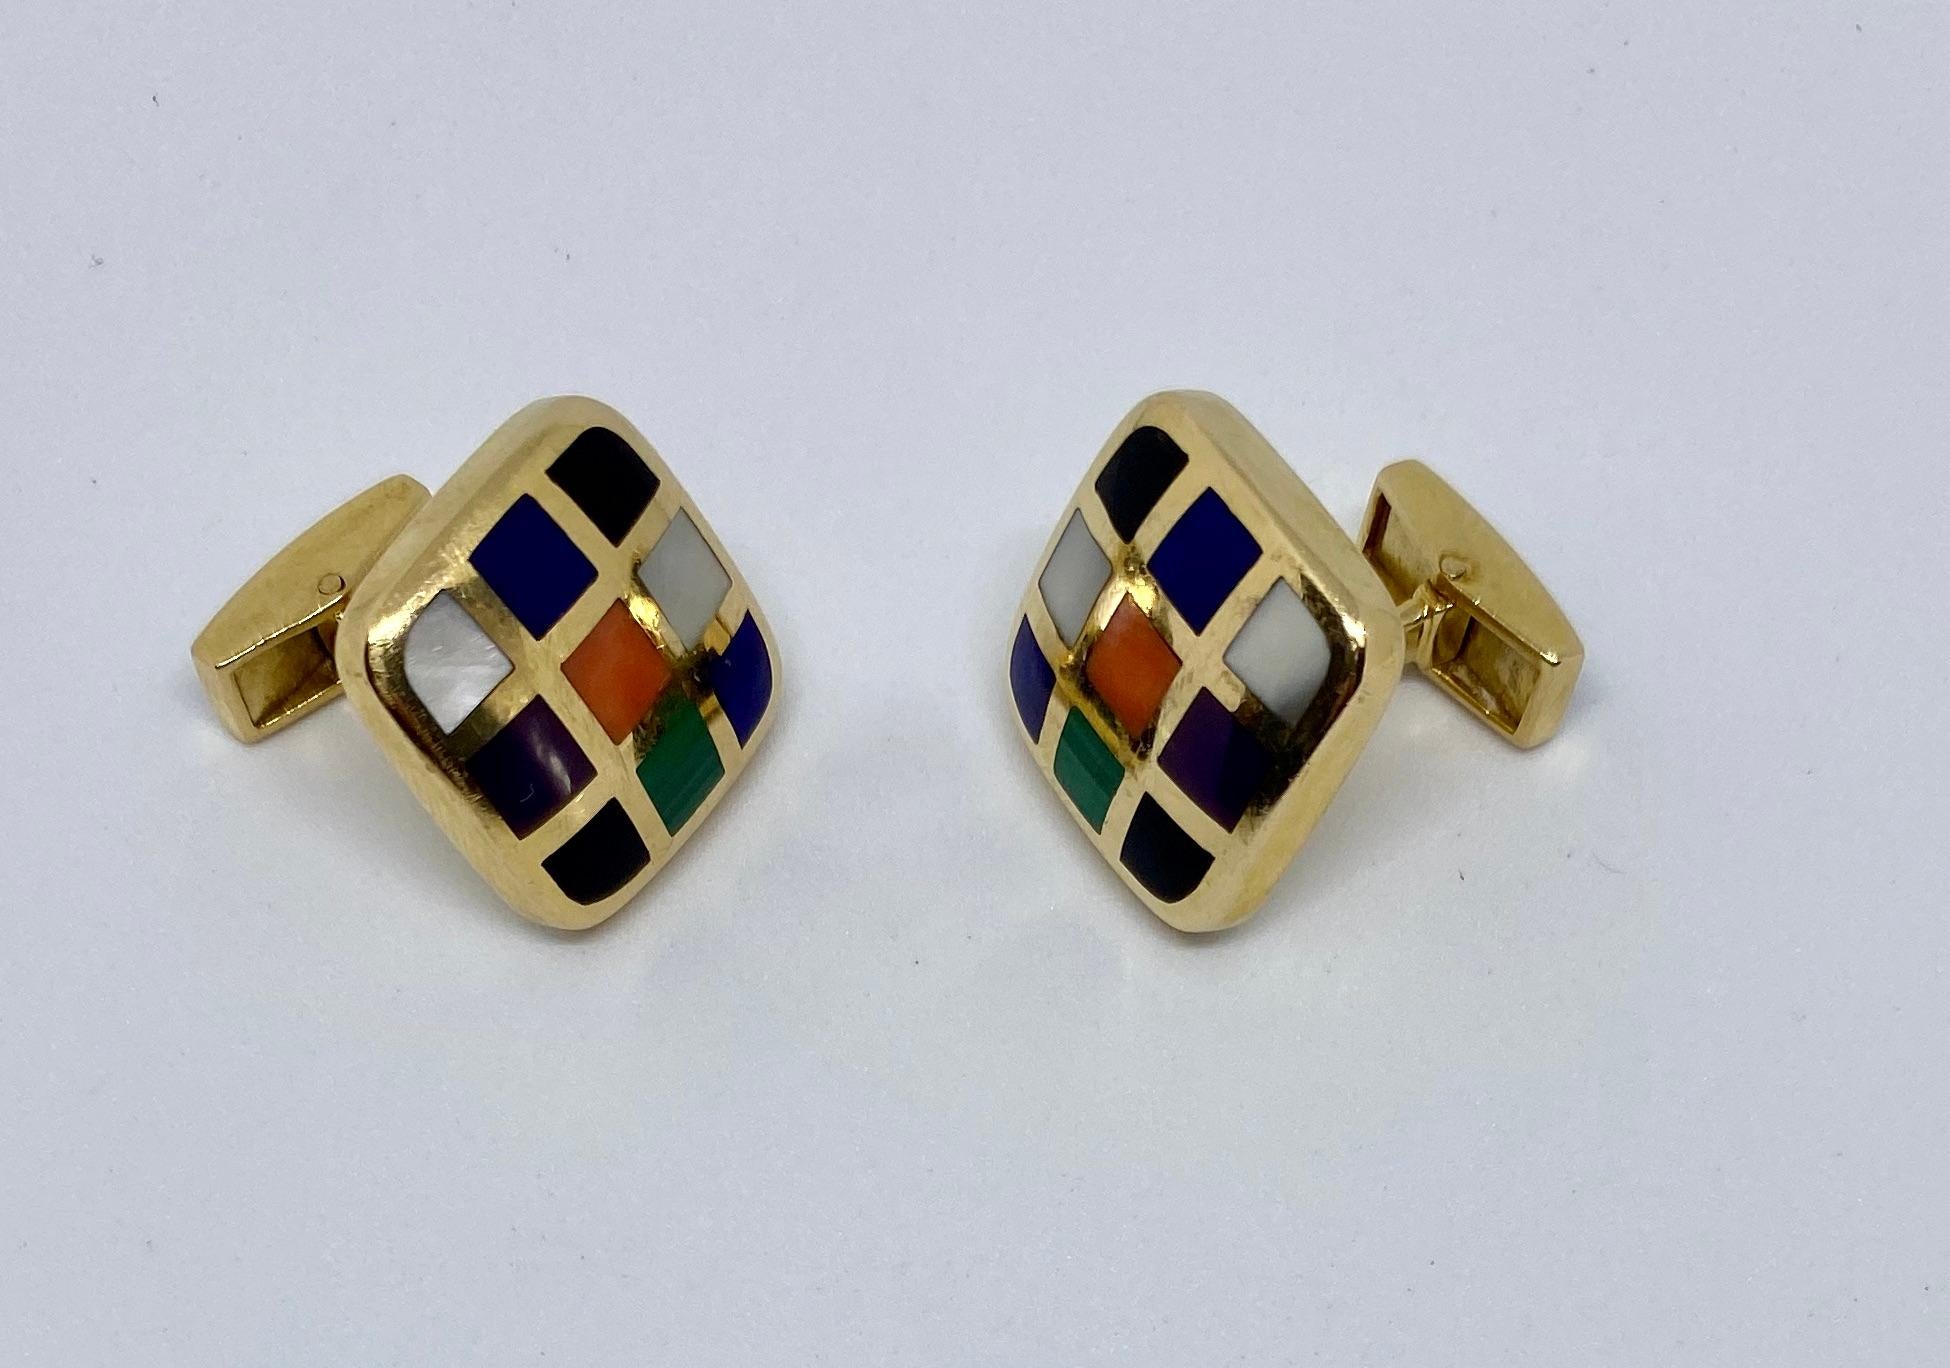 Resembling miniature stained-glass windows, these Asch Grossbardt cufflinks feature the inlays for which the firm is famous. Very few makers of the modern era had the skill to produce inlays of such quality, and for this reason Asch Grossbardt